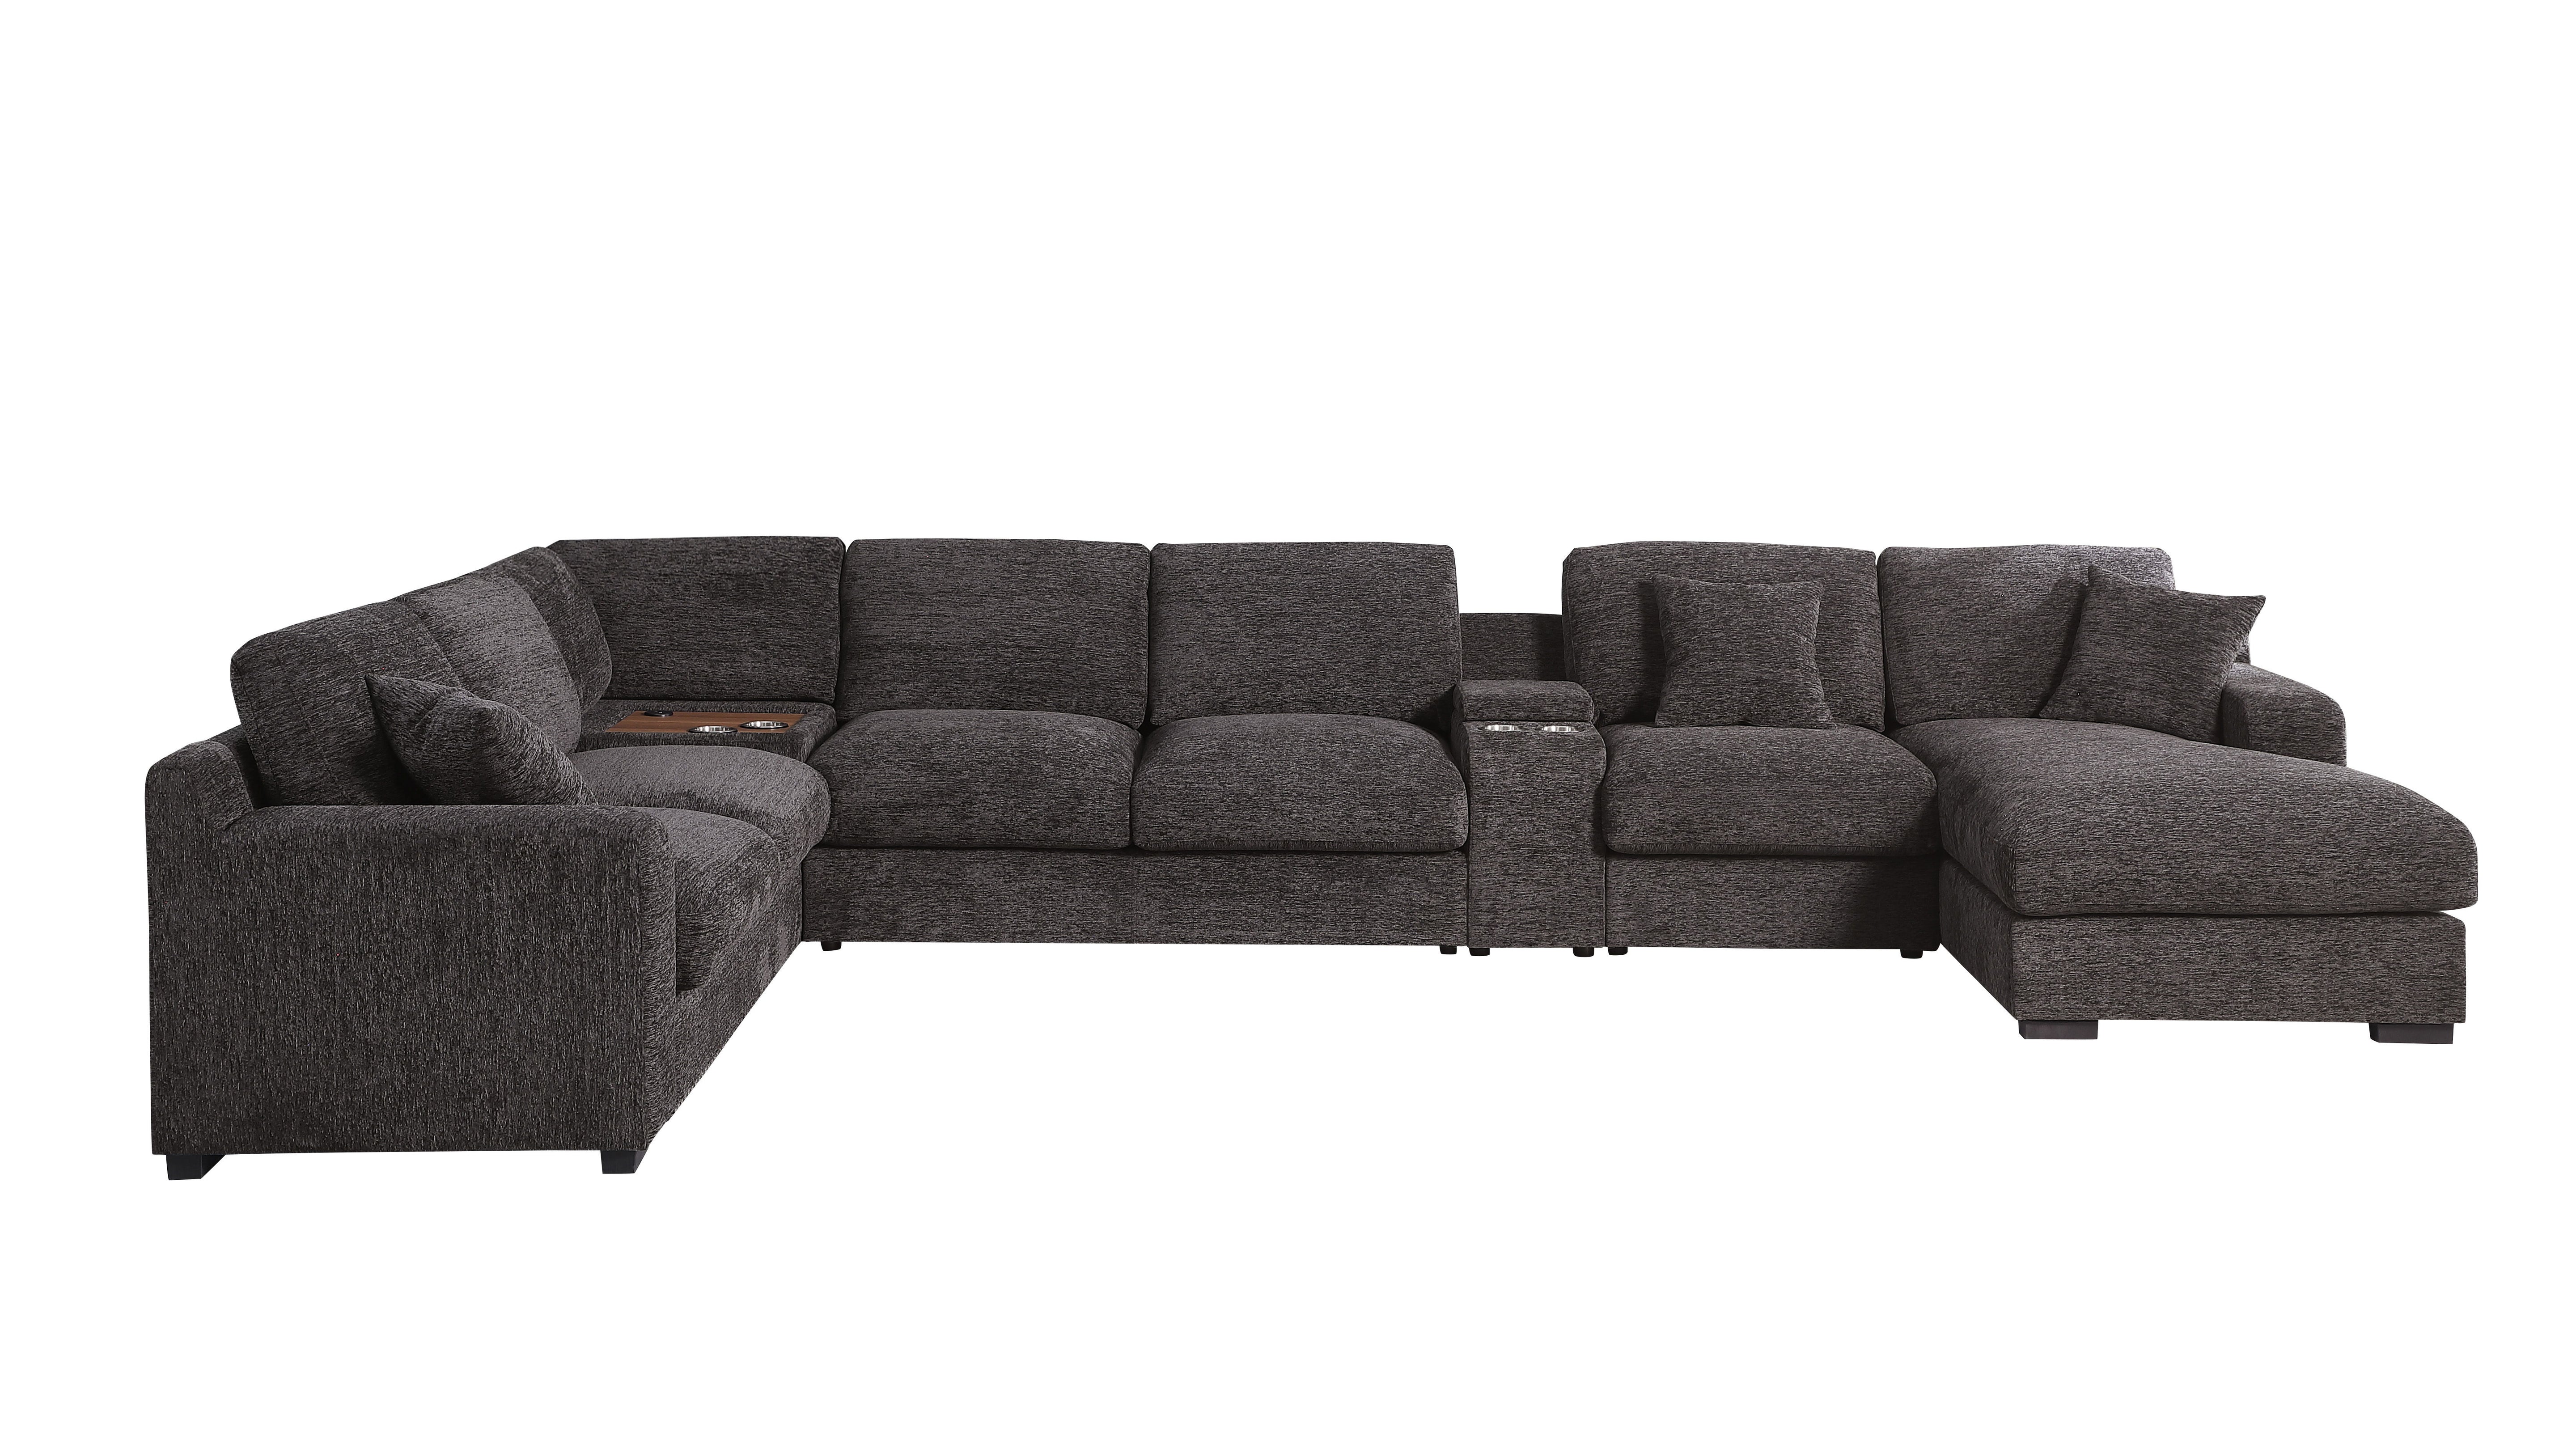 Celine - Chenille Fabric Corner Sectional Sofa With Right-Facing Chaise, Cupholders, And Charging Ports - Gray